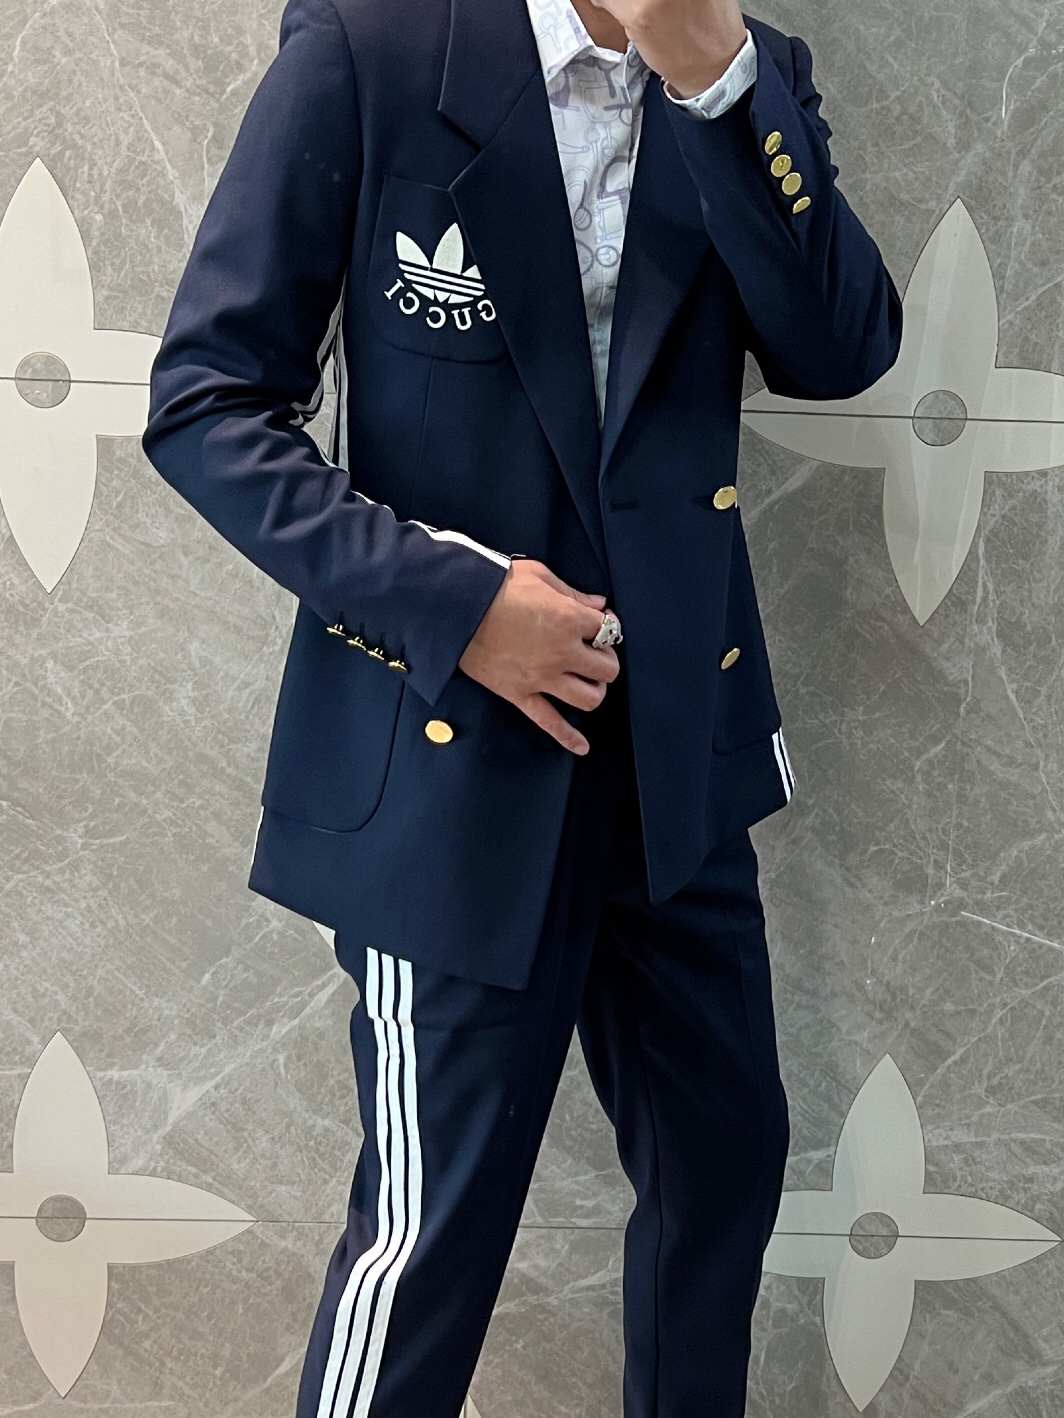 Adidas Business Suit